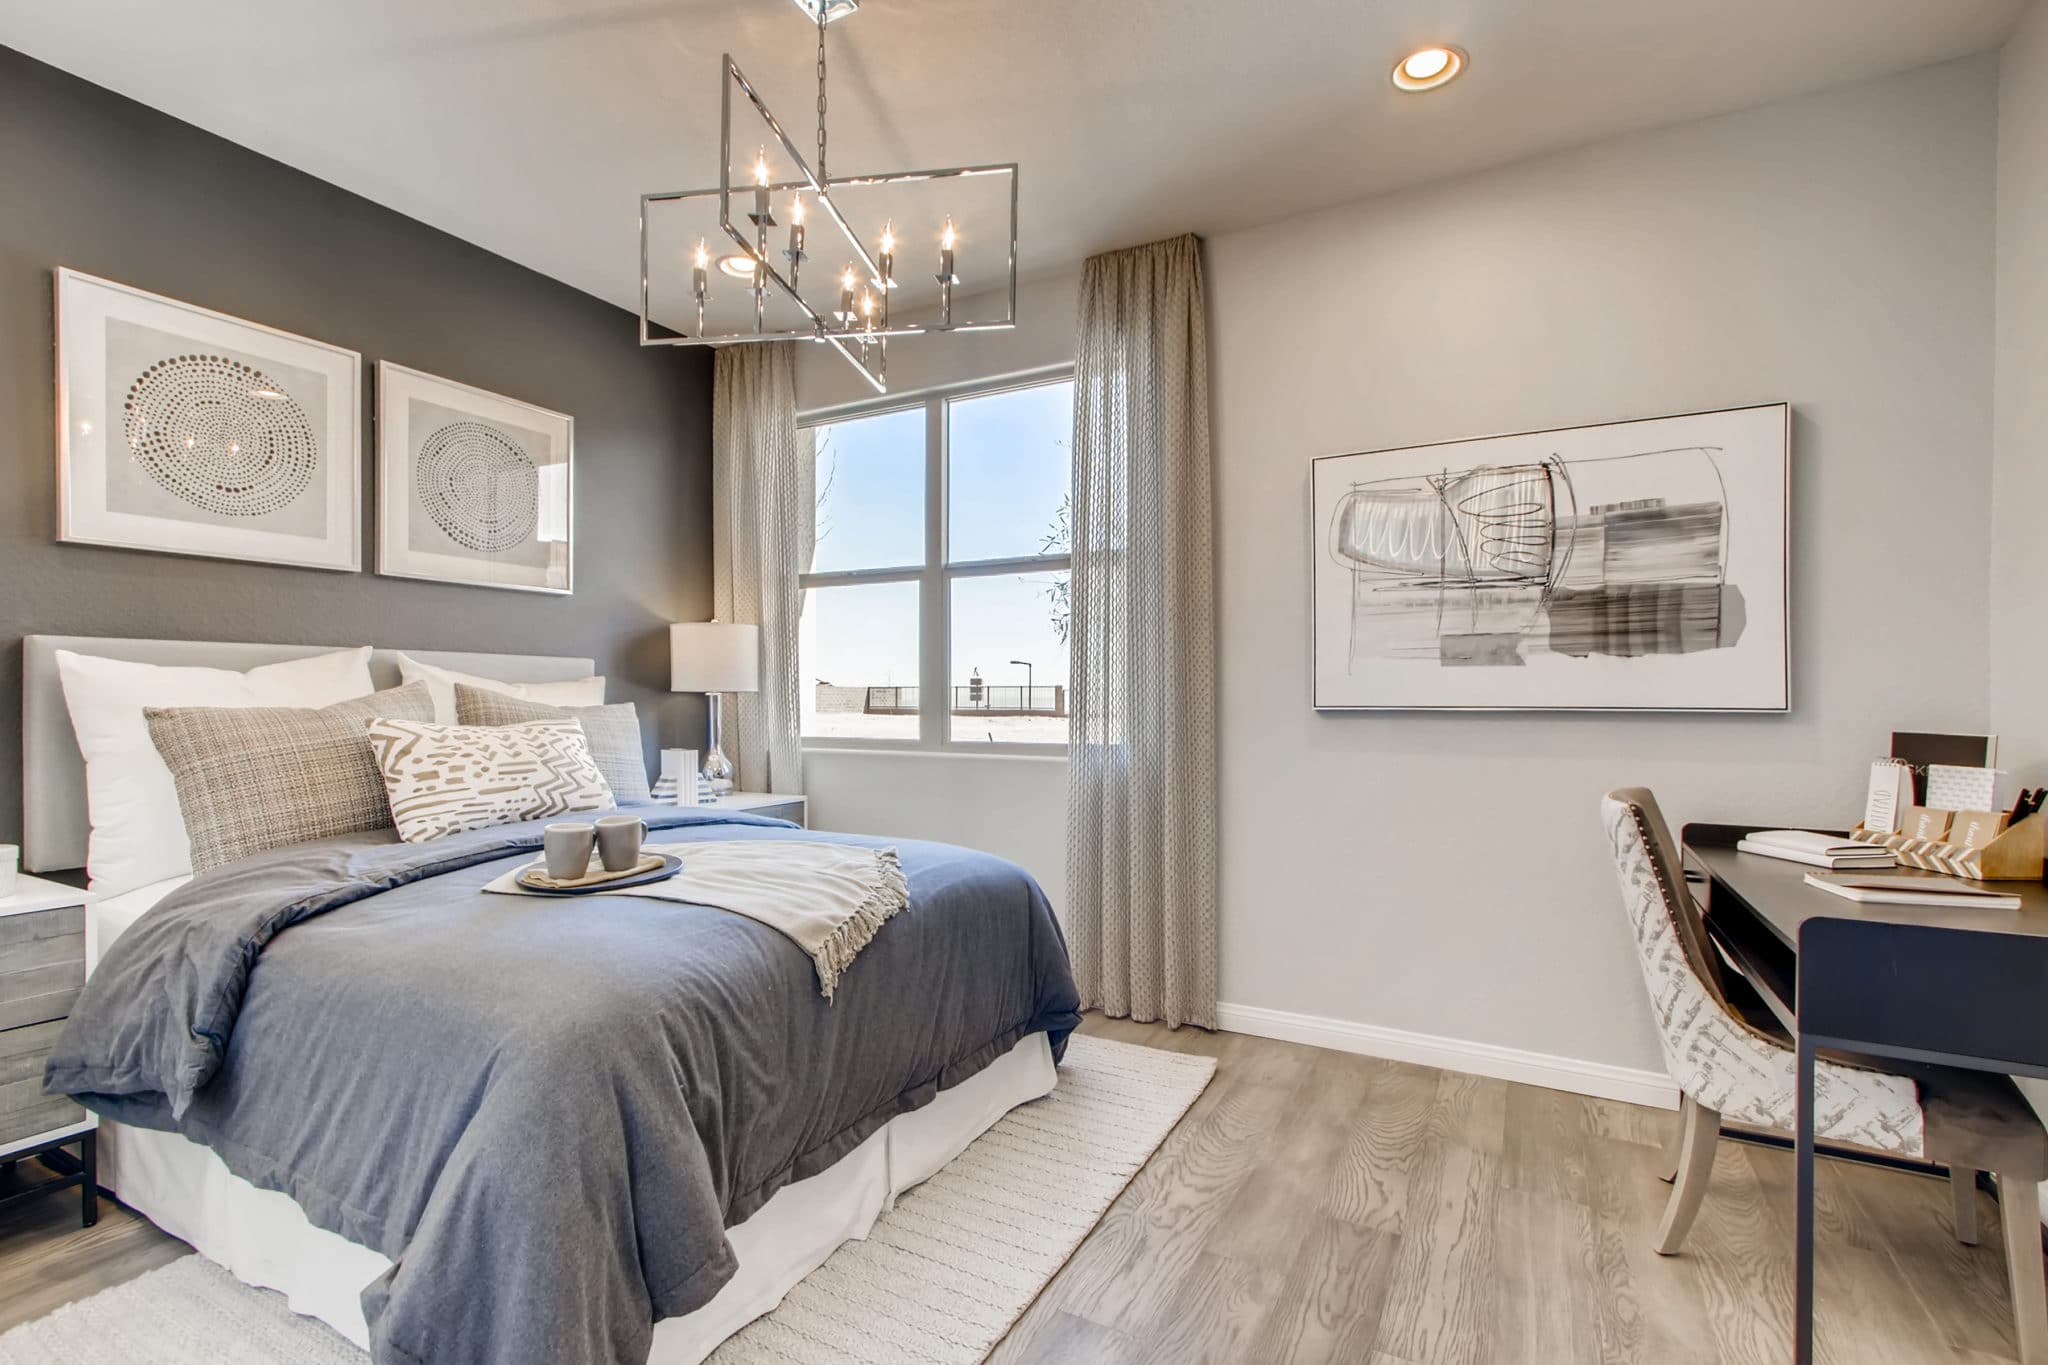 Bedroom of Mojave Plan at Crystal Canyon by Woodside Homes